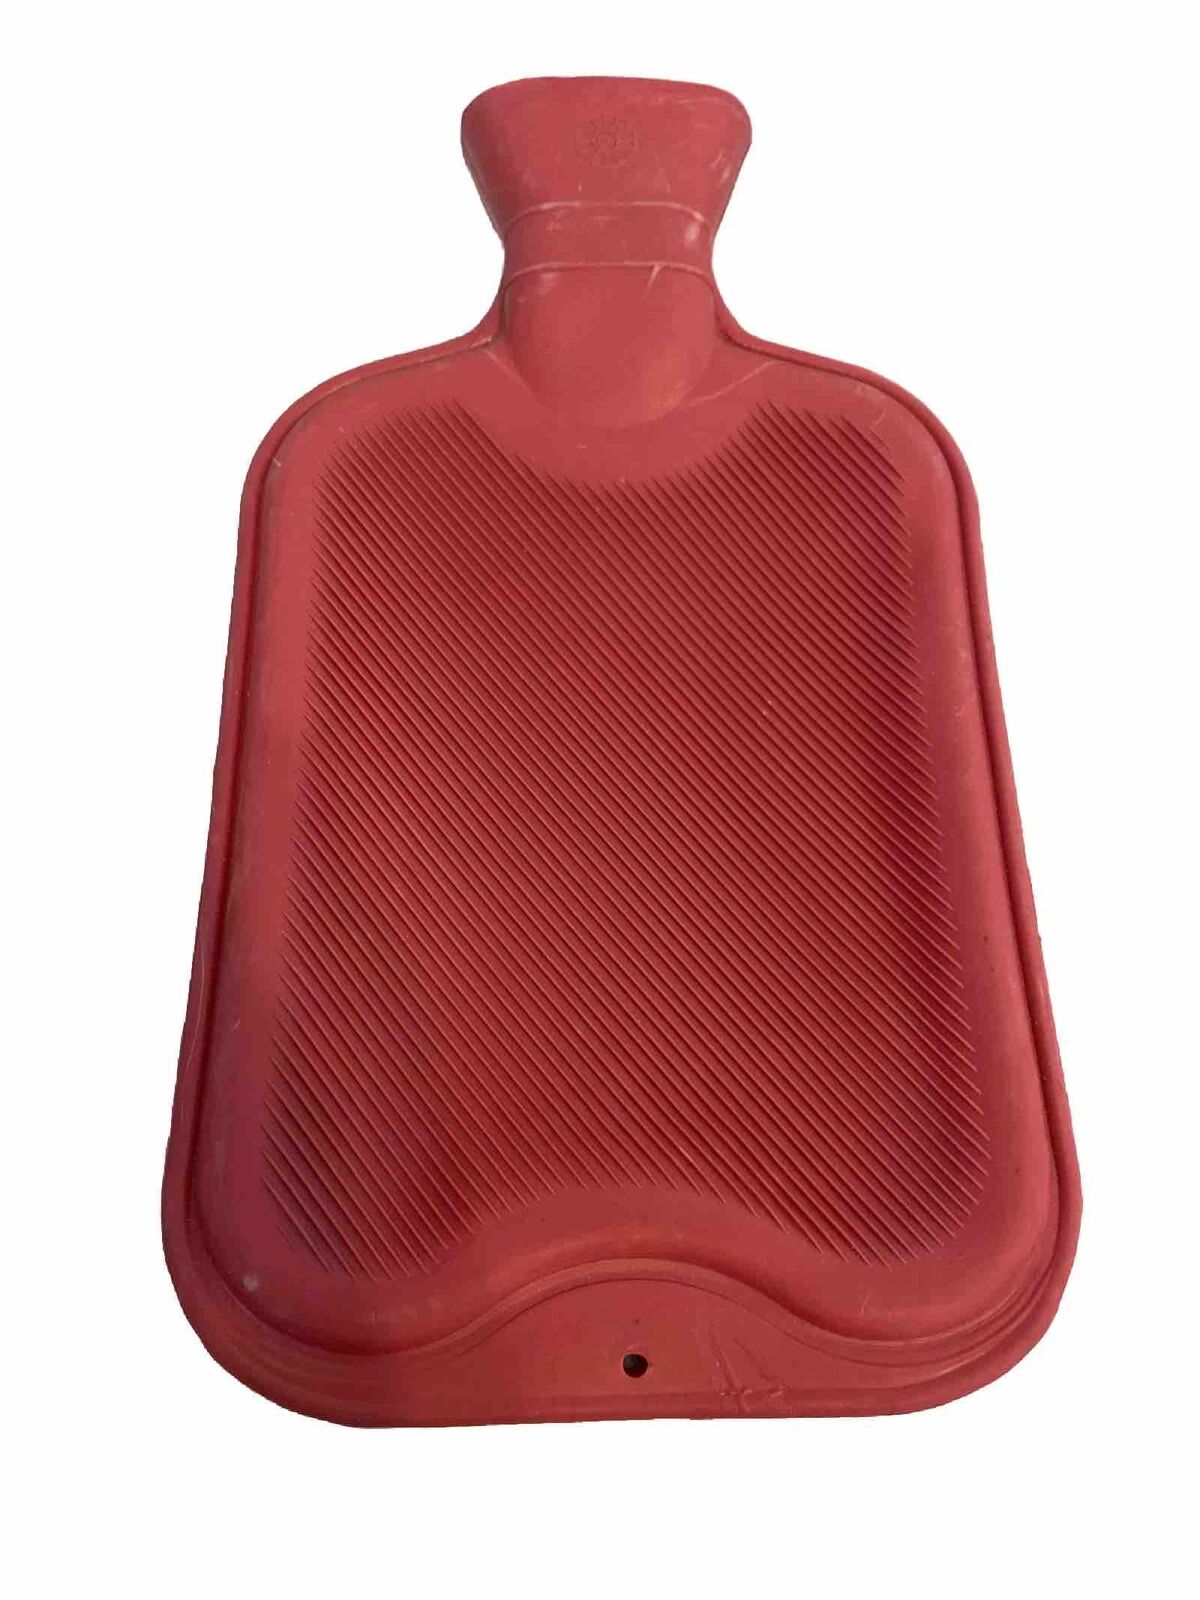 Pink Rubber Hot Water Bottle Heating Pad w/ Plastic Stopper